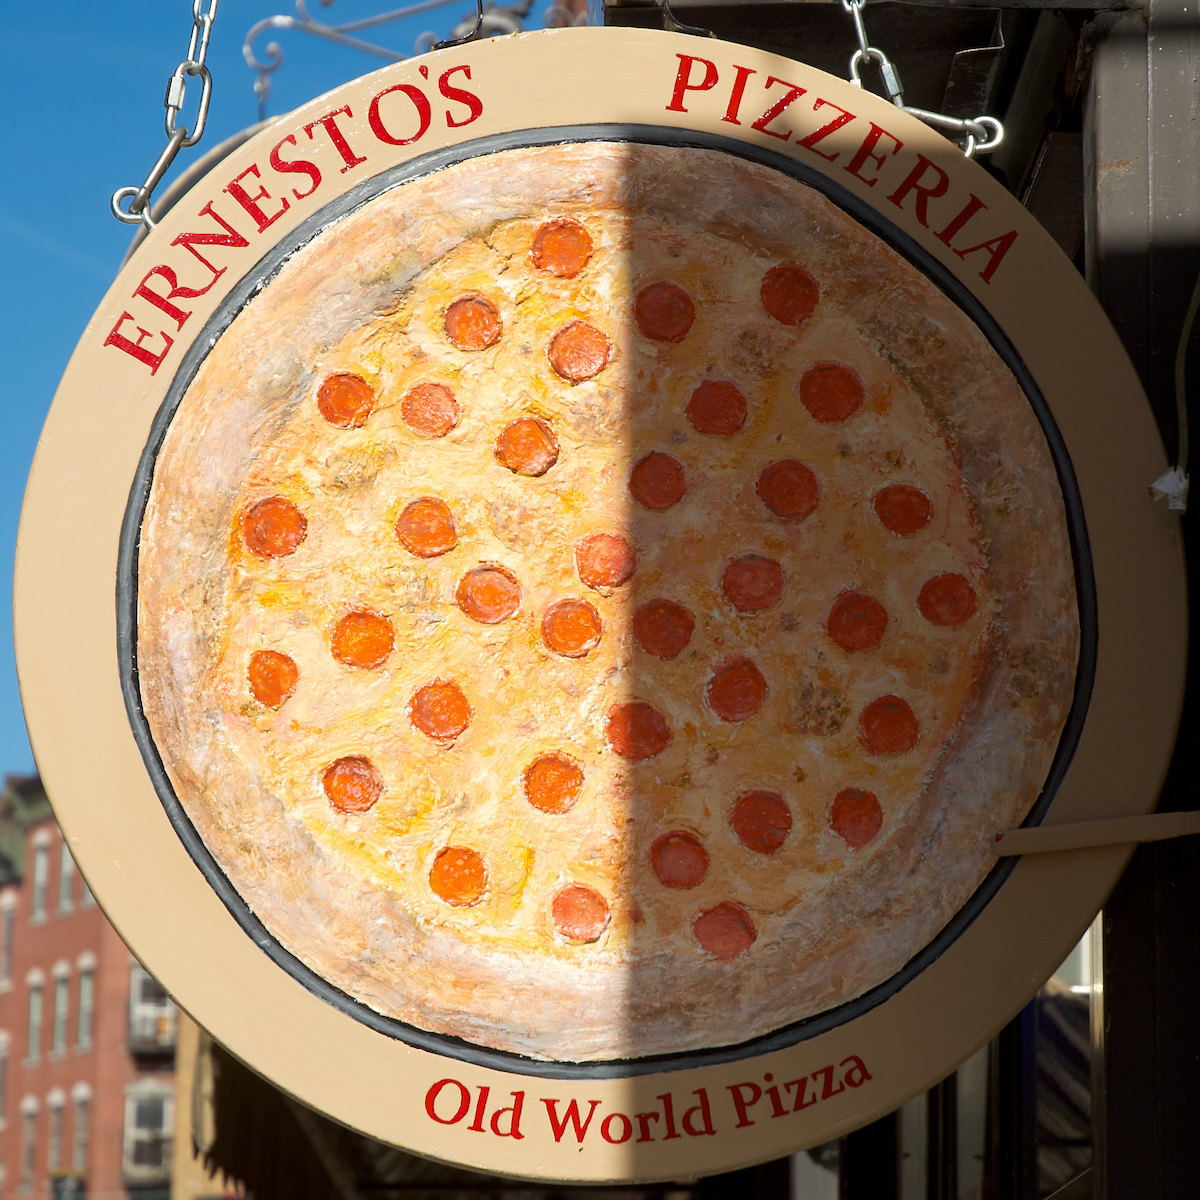 A round sign with a large picture of a pepperoni pizza and the name "Ernesto's Pizzeria" in red letters. Ernesto's is a popular North End Boston restaurant.